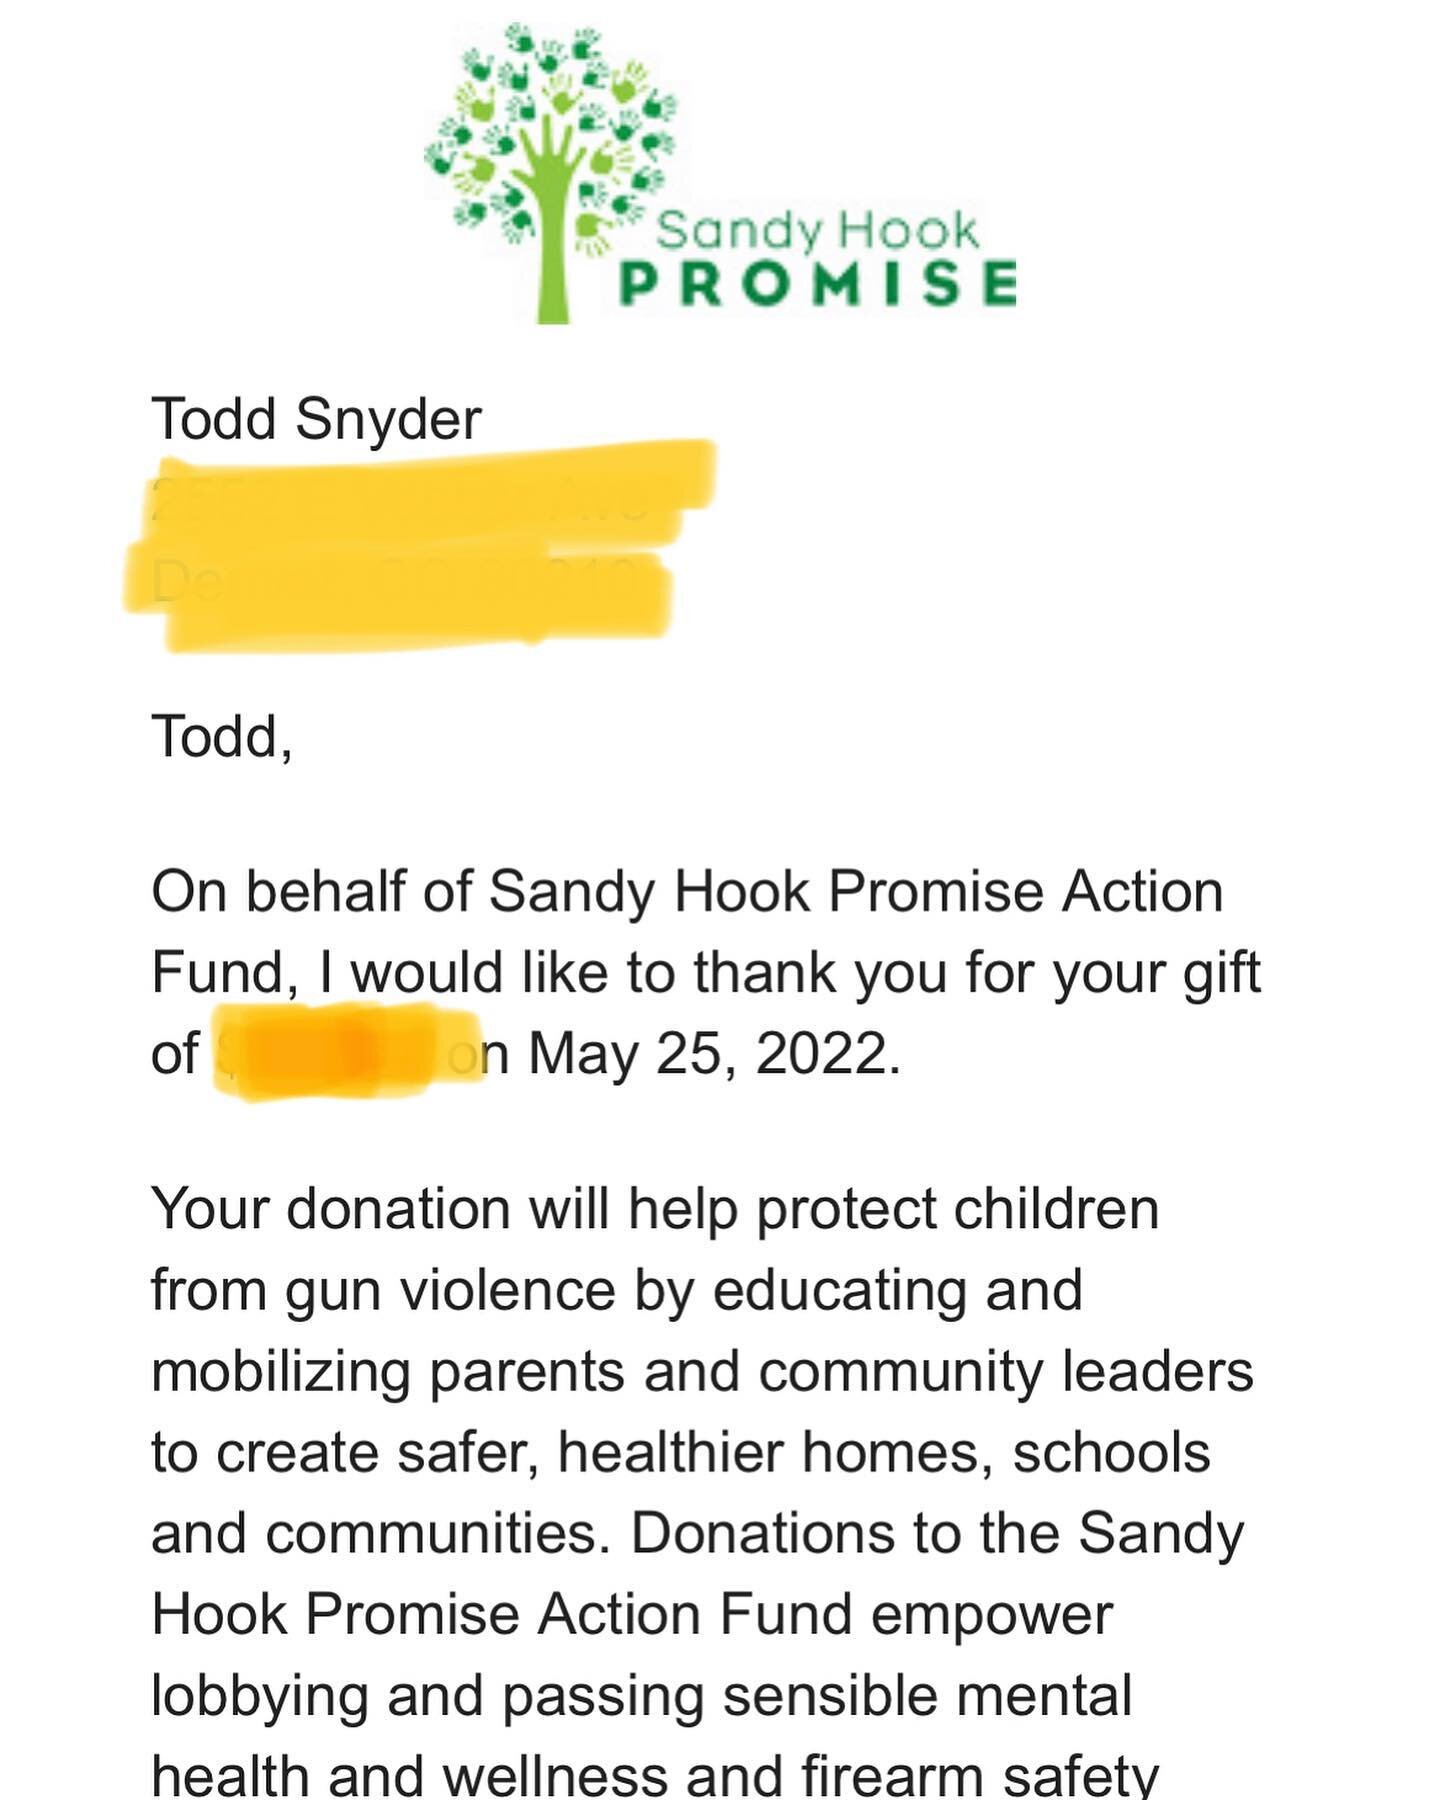 Enough is enough with these school shootings. Please do your part and get involved or find an organization to support their efforts for smart gun control measures and mental health support. @sandyhookpromise